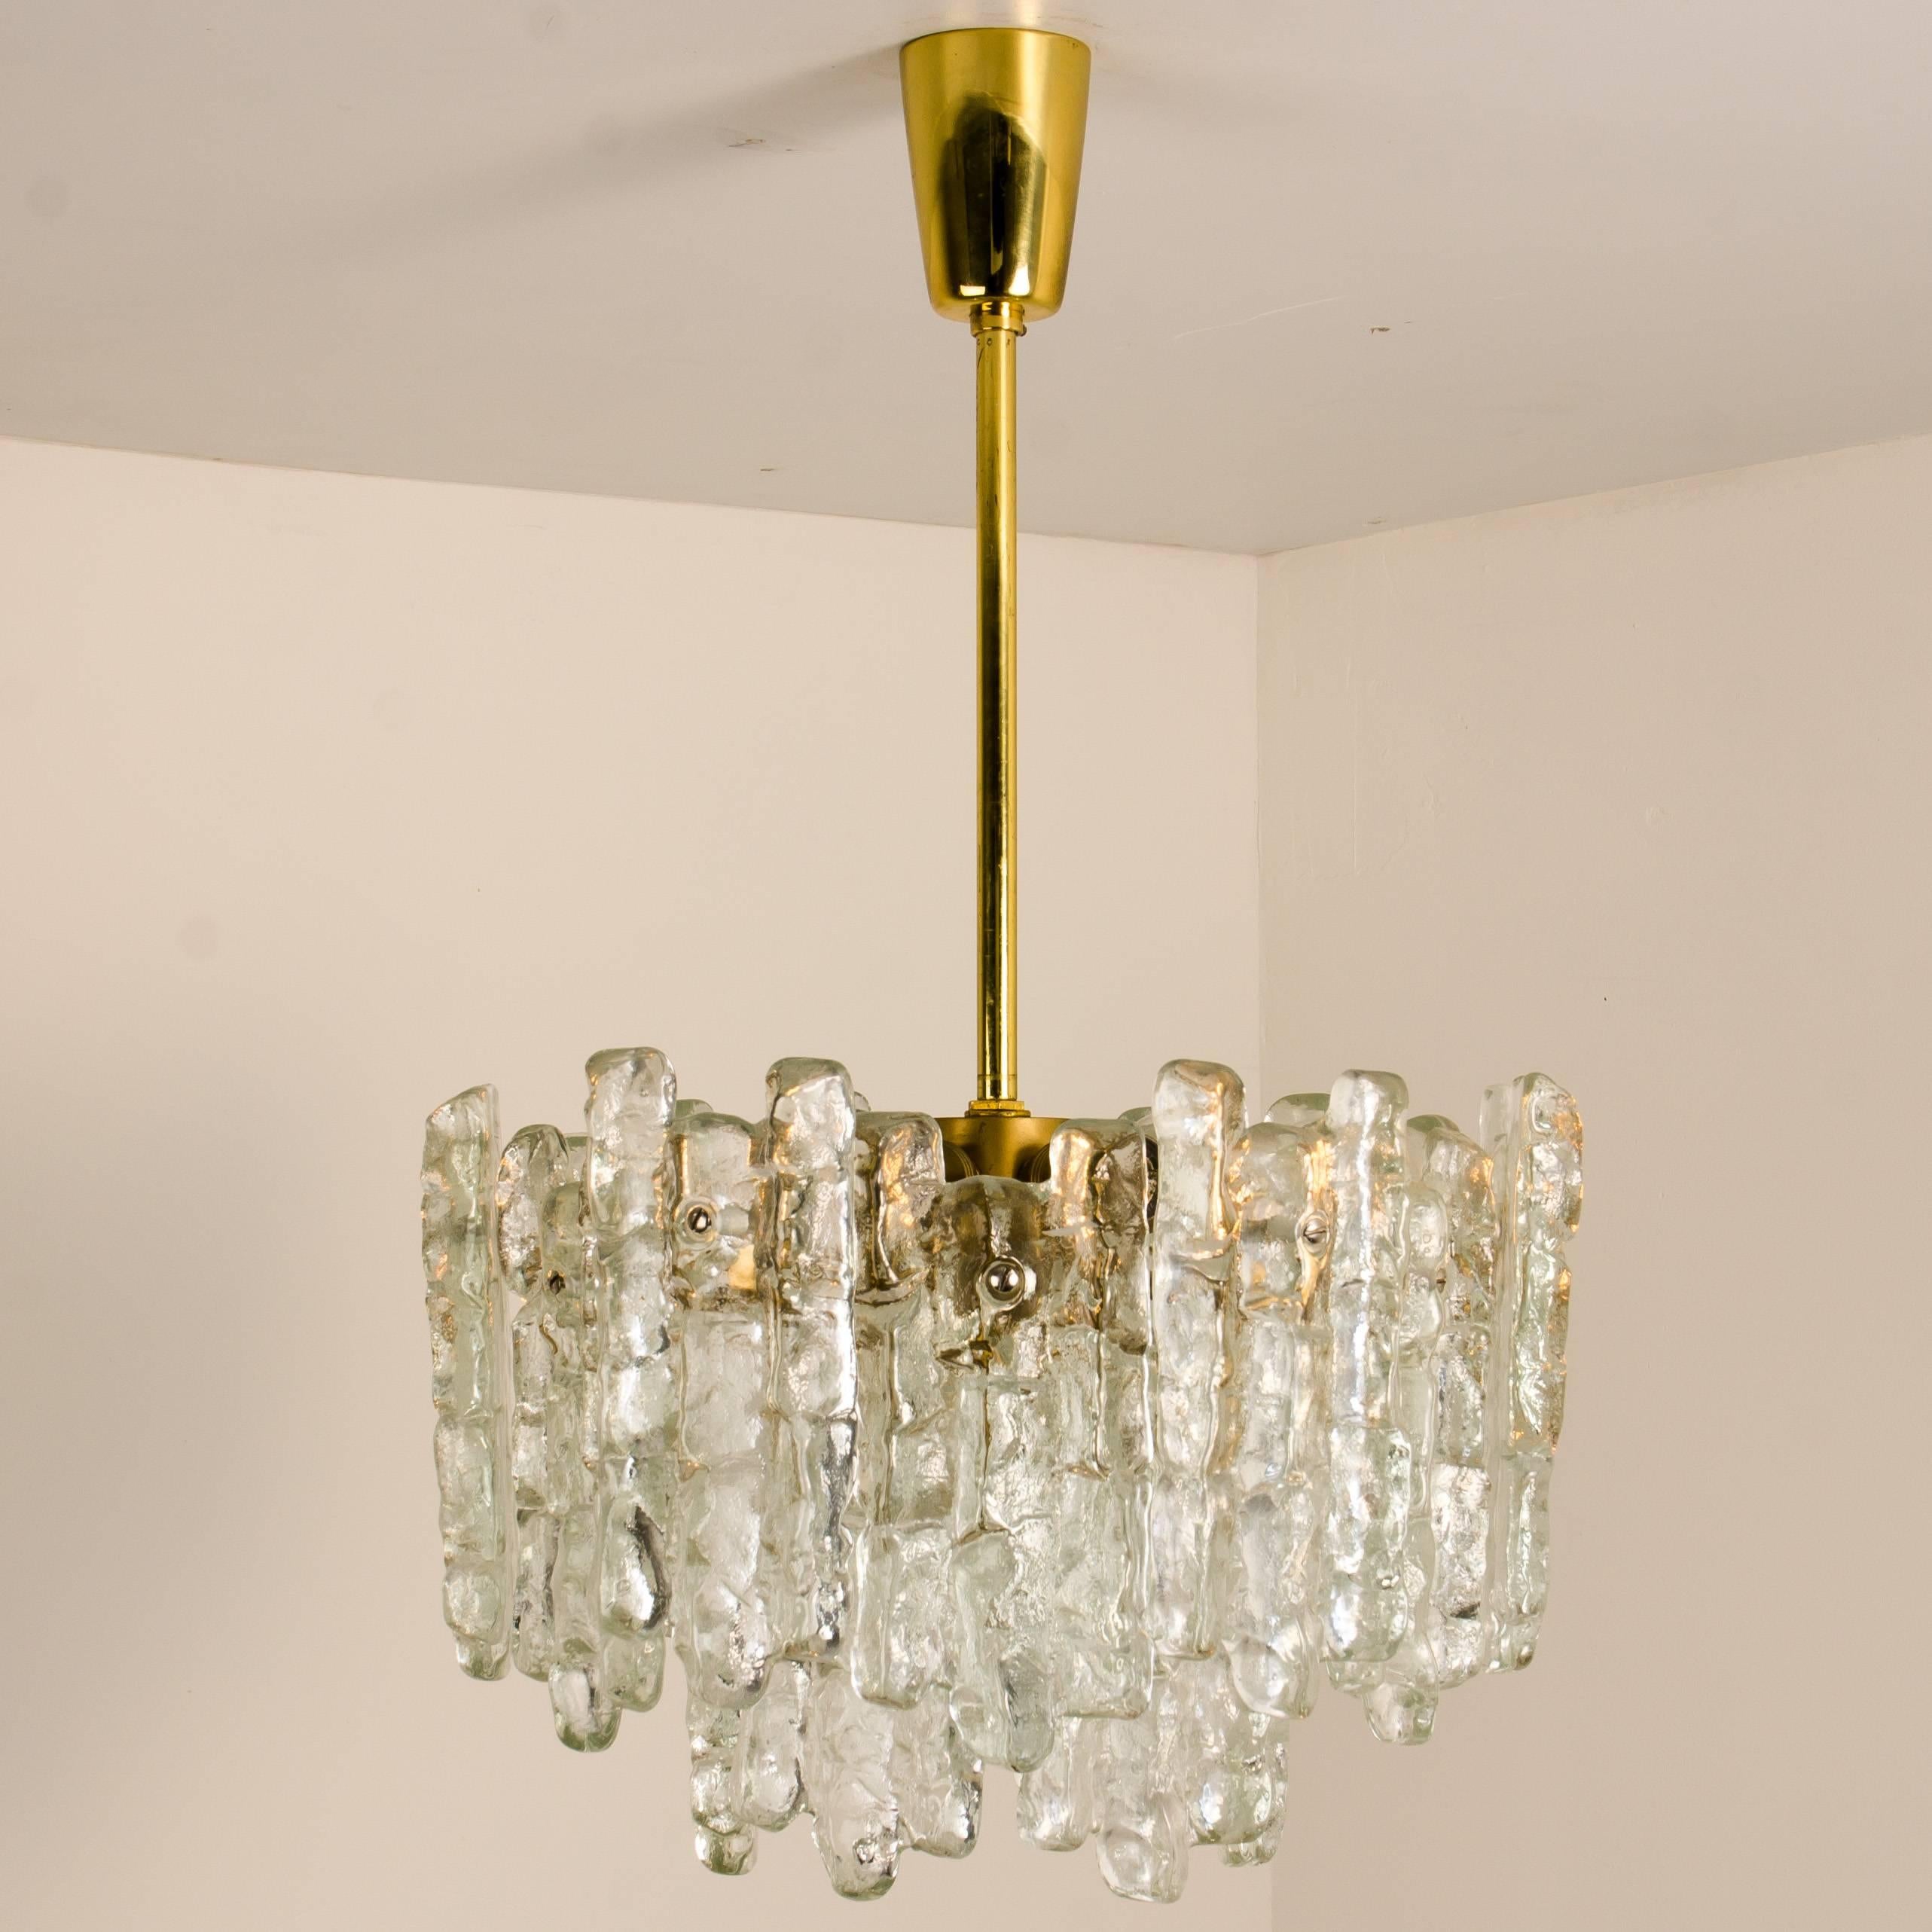 Pair of Modern Kalmar Brass Two-Tiered Ice Glass Pendant Chandeliers, 1970s For Sale 3